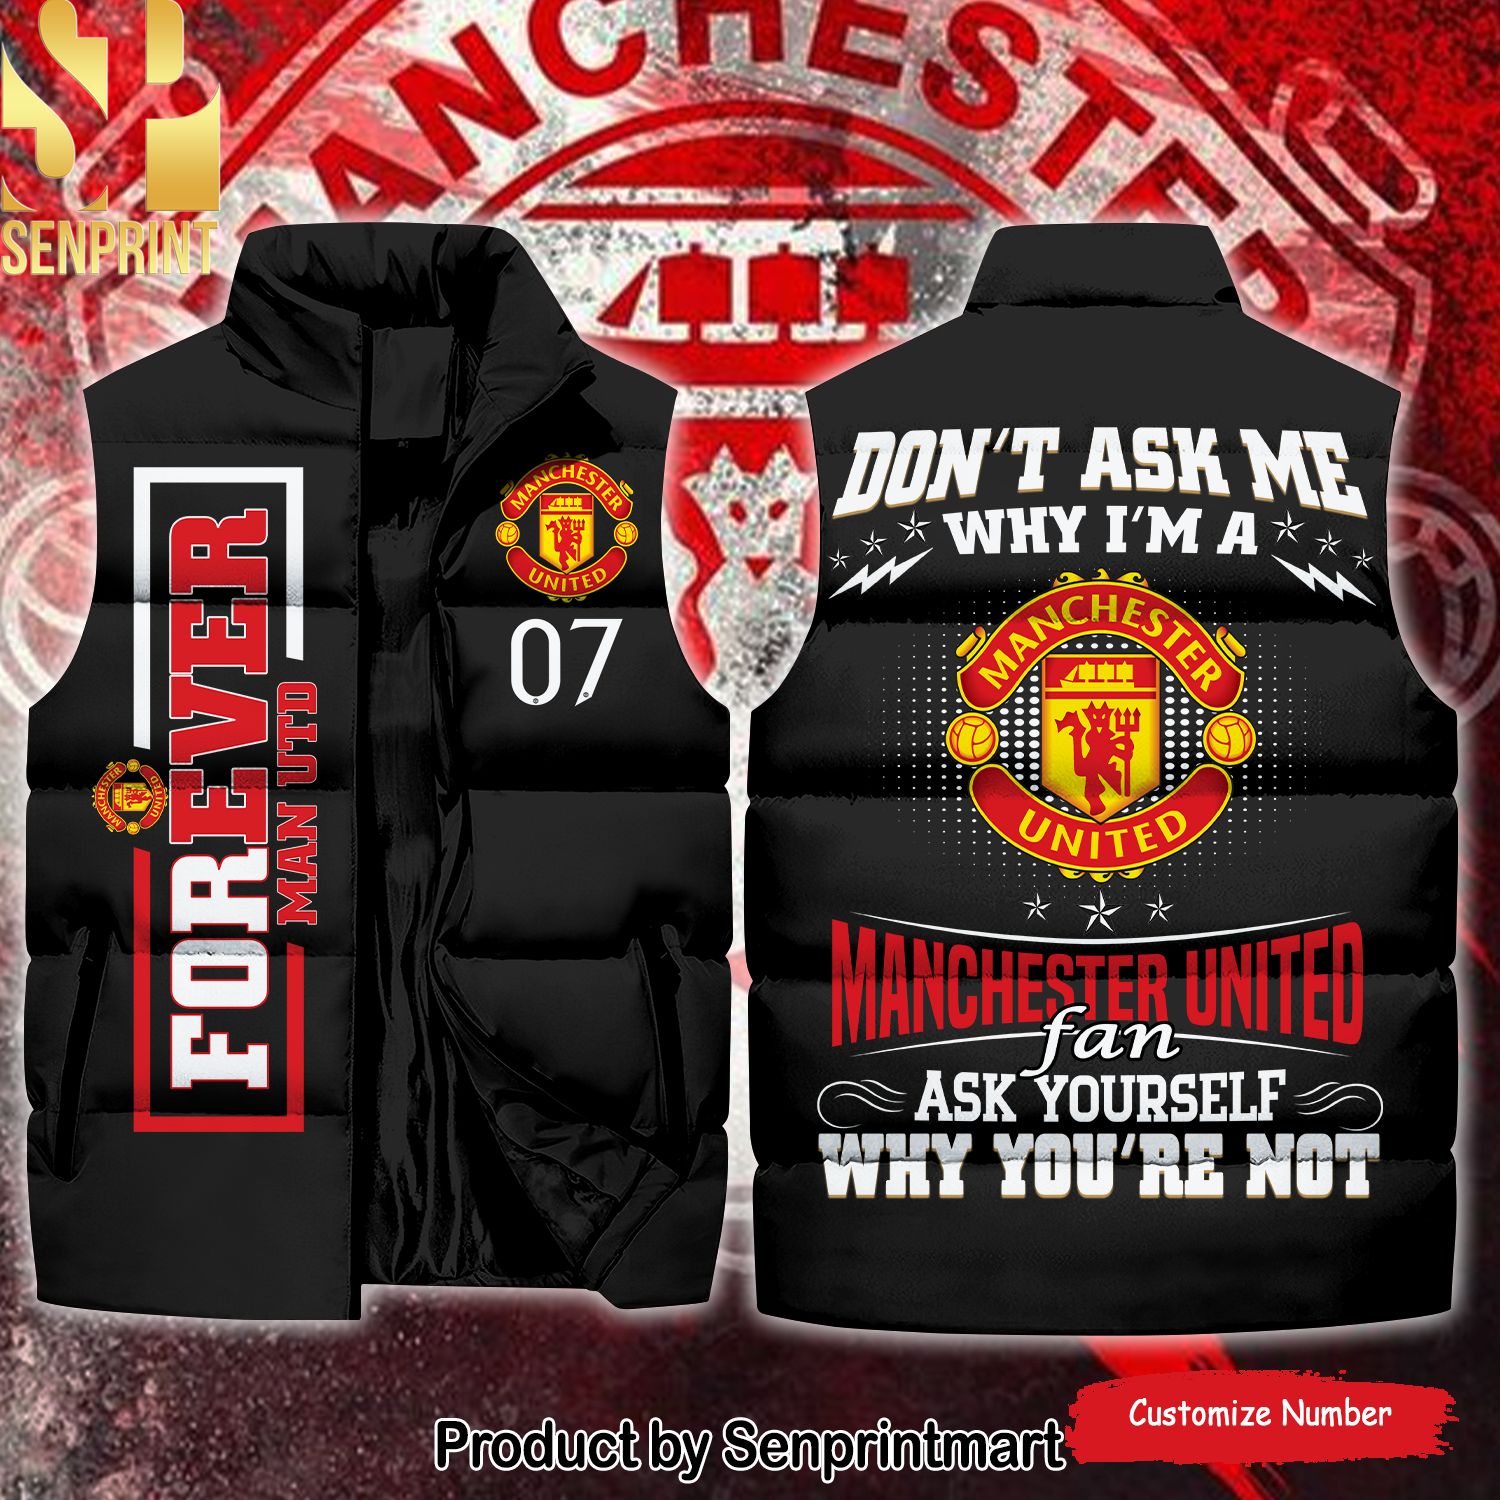 English Premier League For Ever Manchester United New Style Sleeveless Jacket